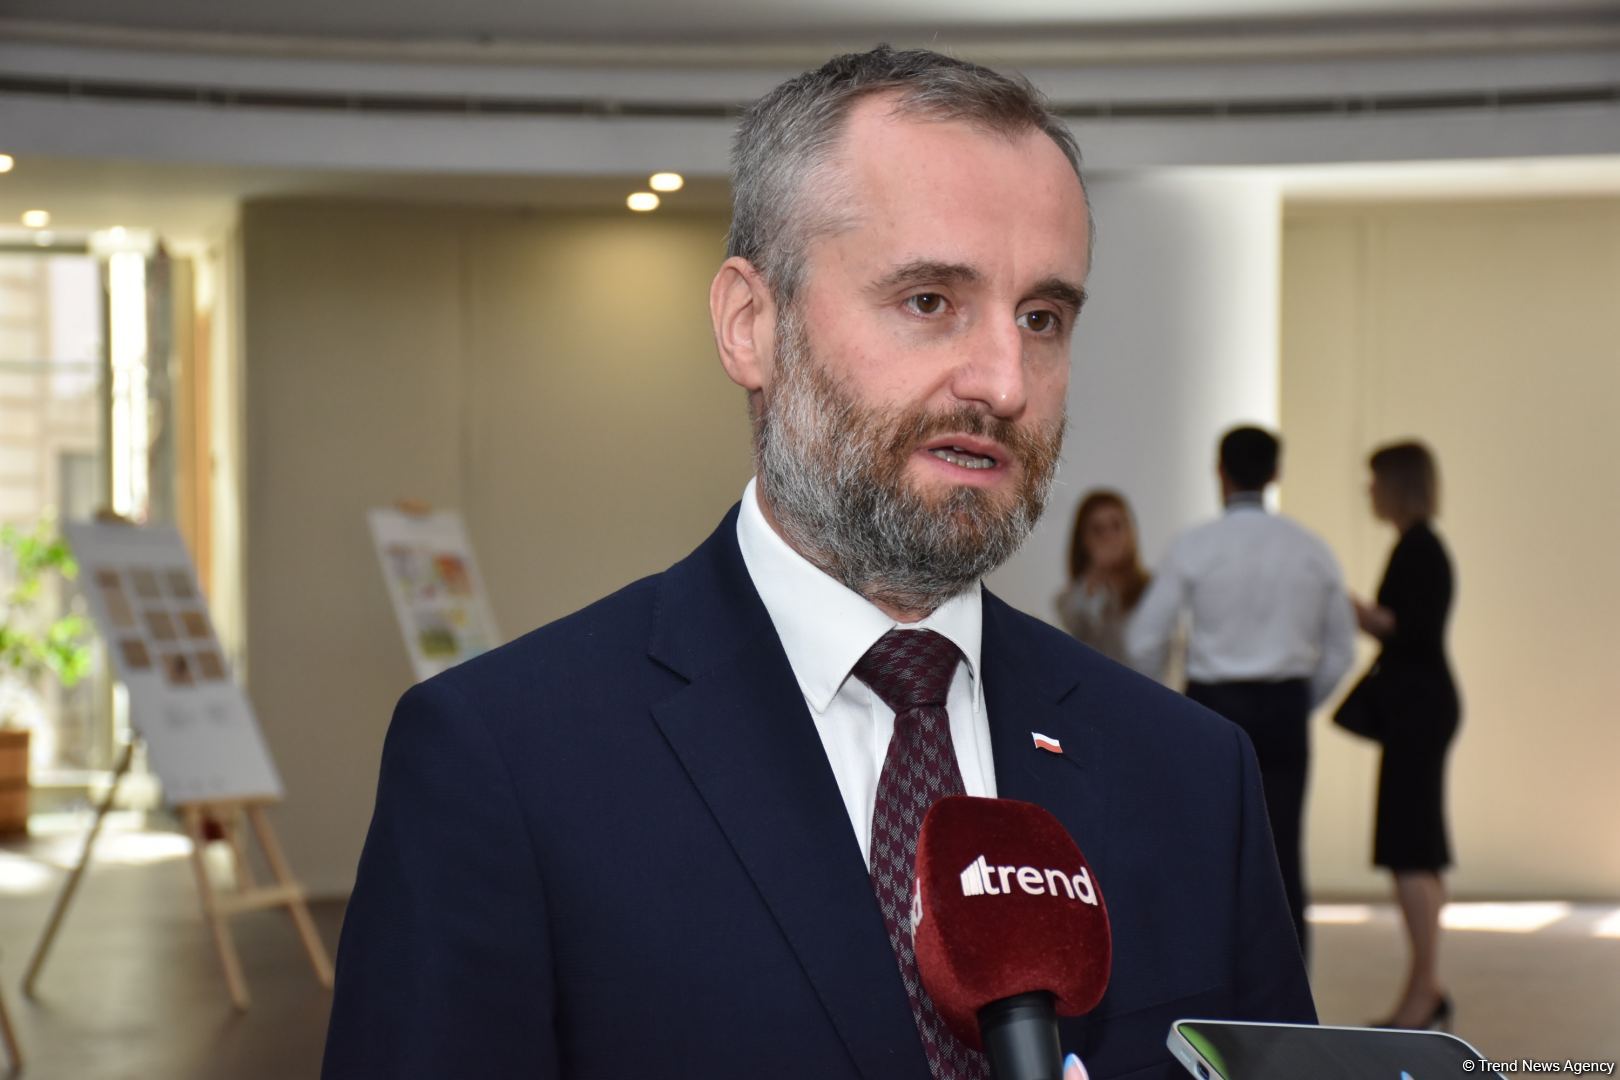 All products from Poland to Azerbaijan can be transported via TITR - ambassador